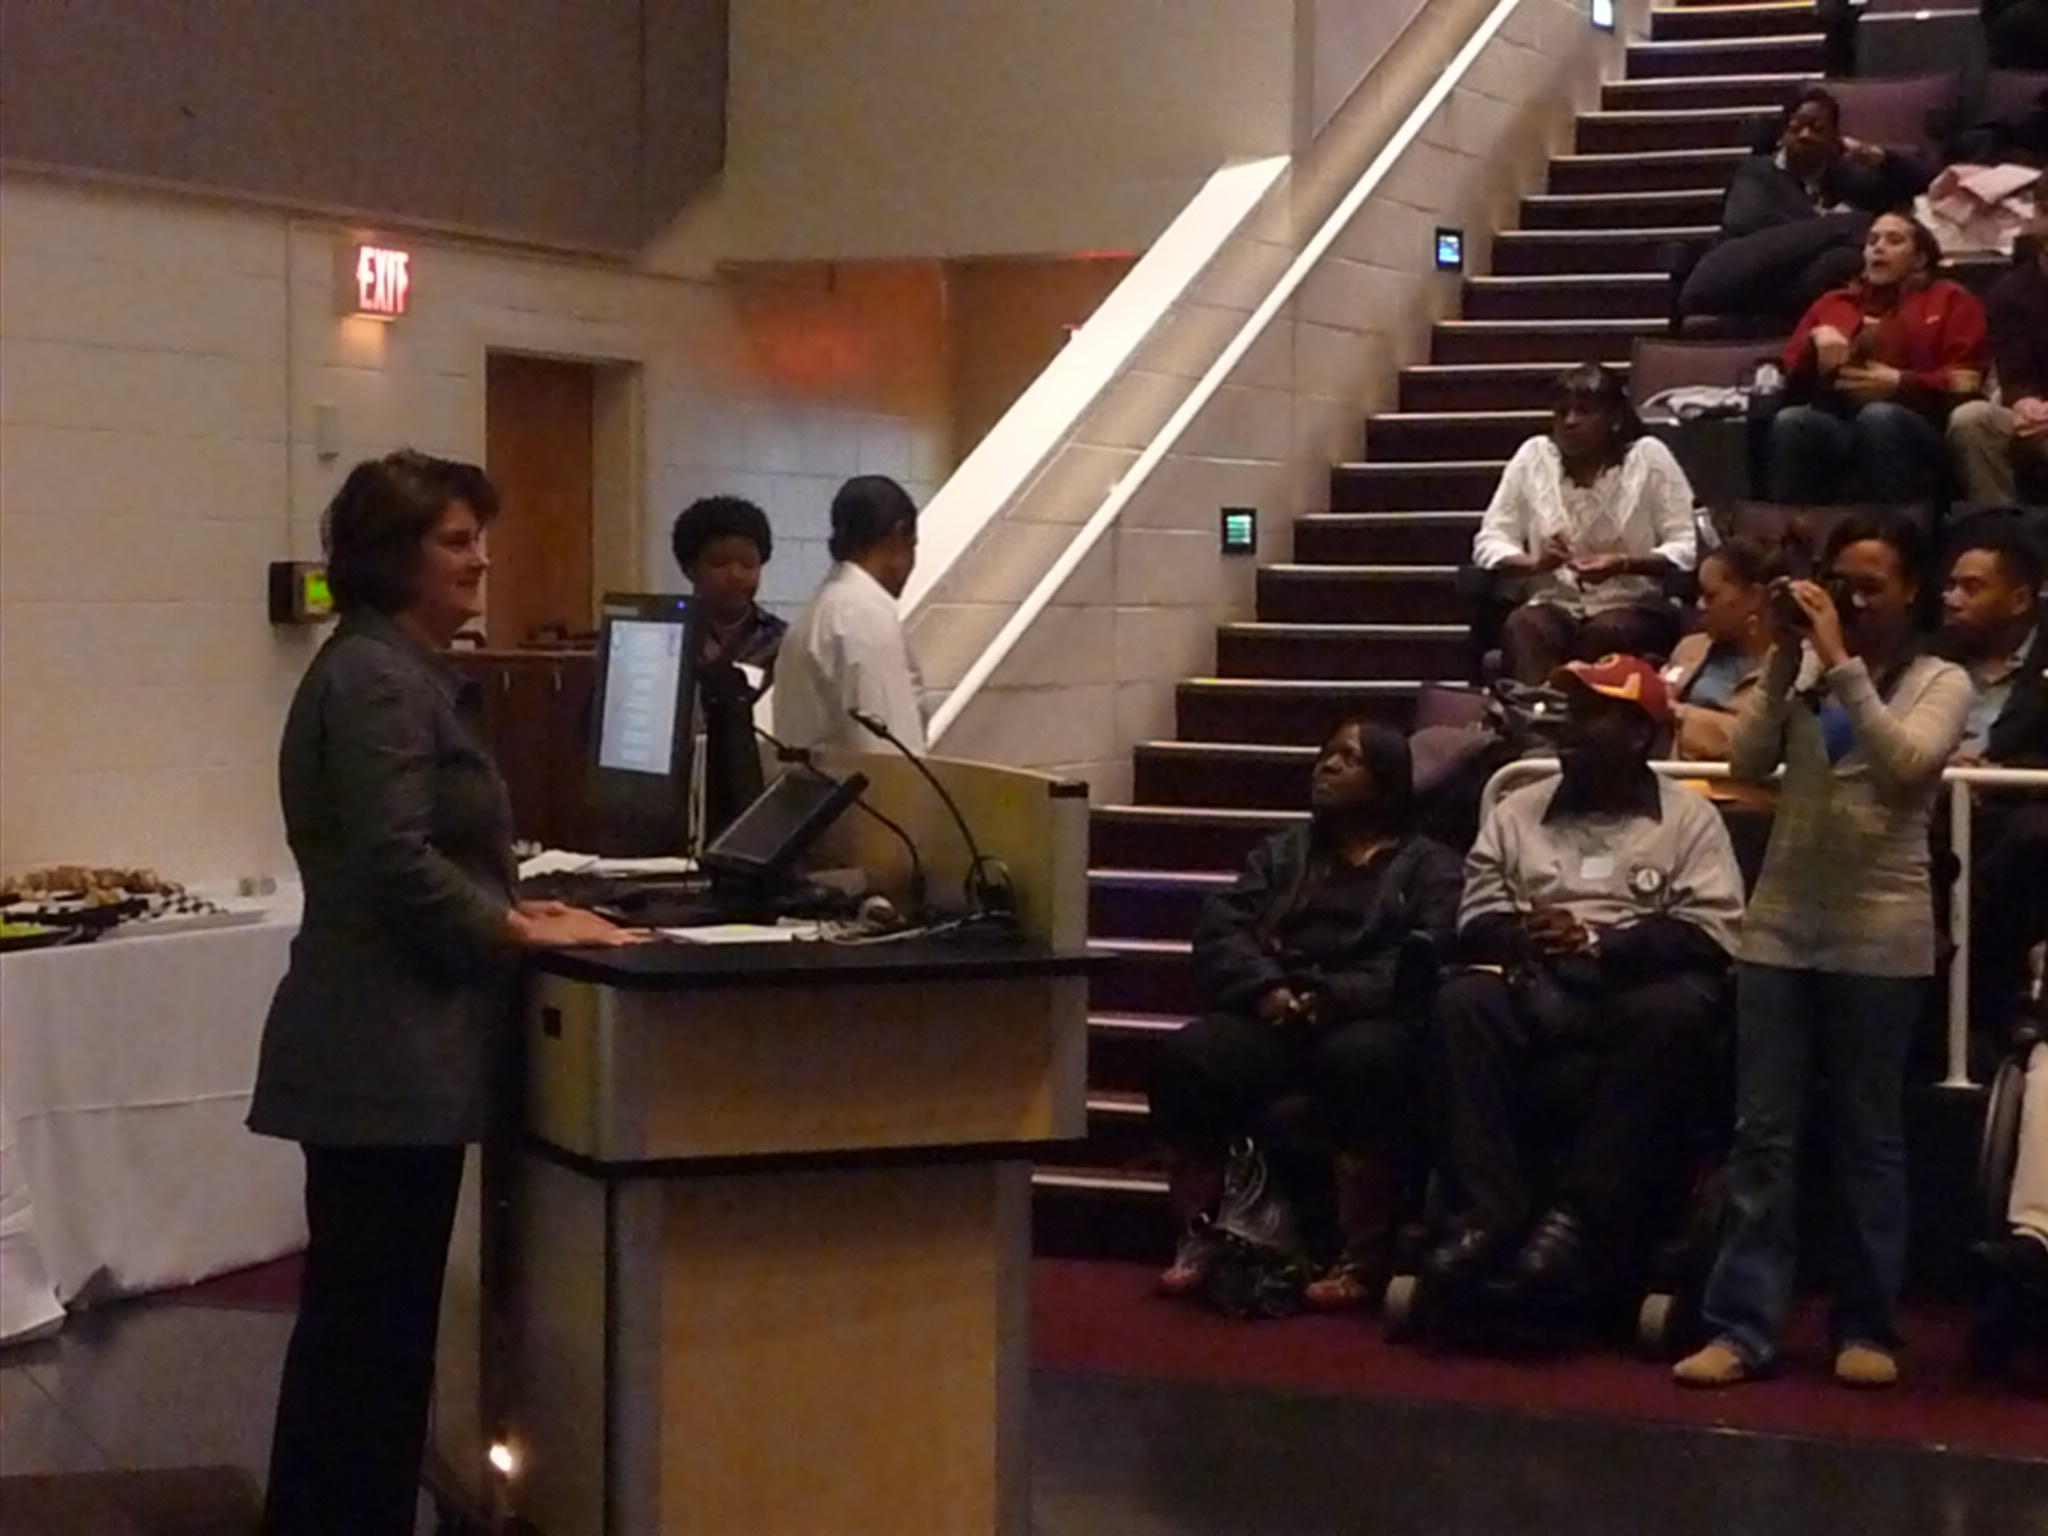 Virginia first lady Anne Holton addressed AmeriCorps members and led them in reciting the AmeriCorps pledge.